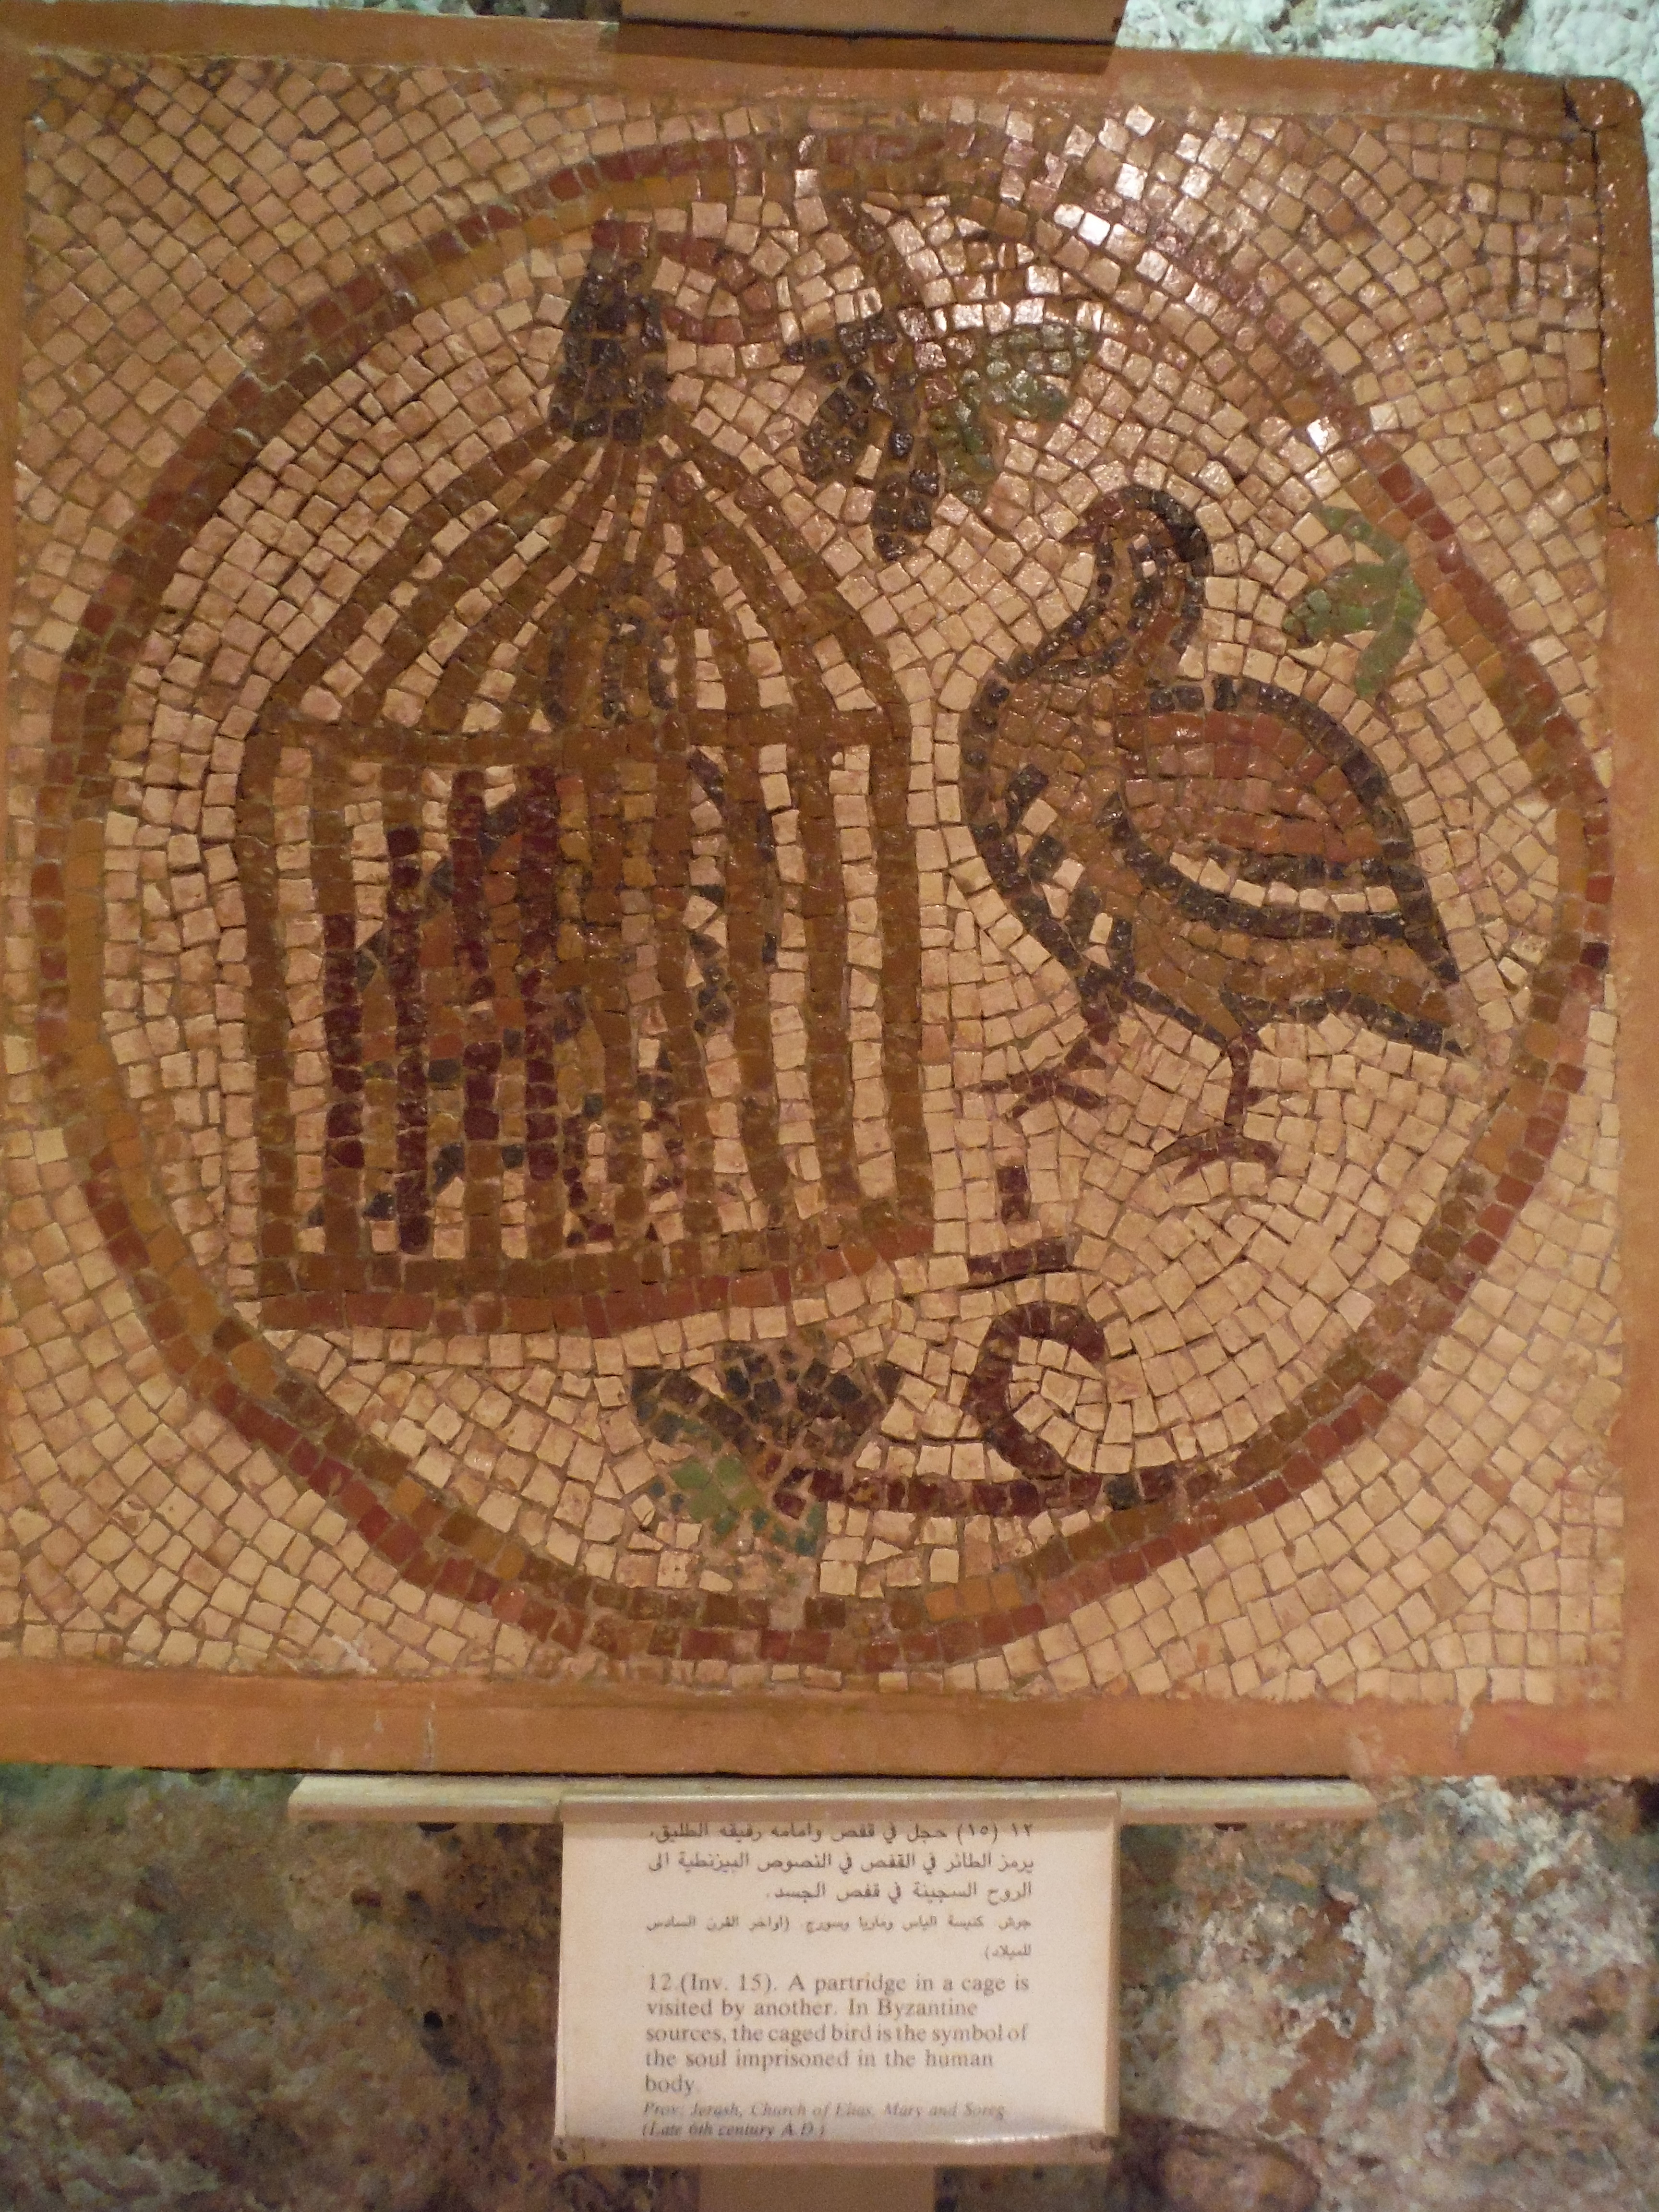 From the Museum of Popular Traditions in downtown Amman. The caption reads, "A partridge in a cage is visited by another. In Byzantine sources, the caged bird is the symbol of the soul imprisoned in the human body."